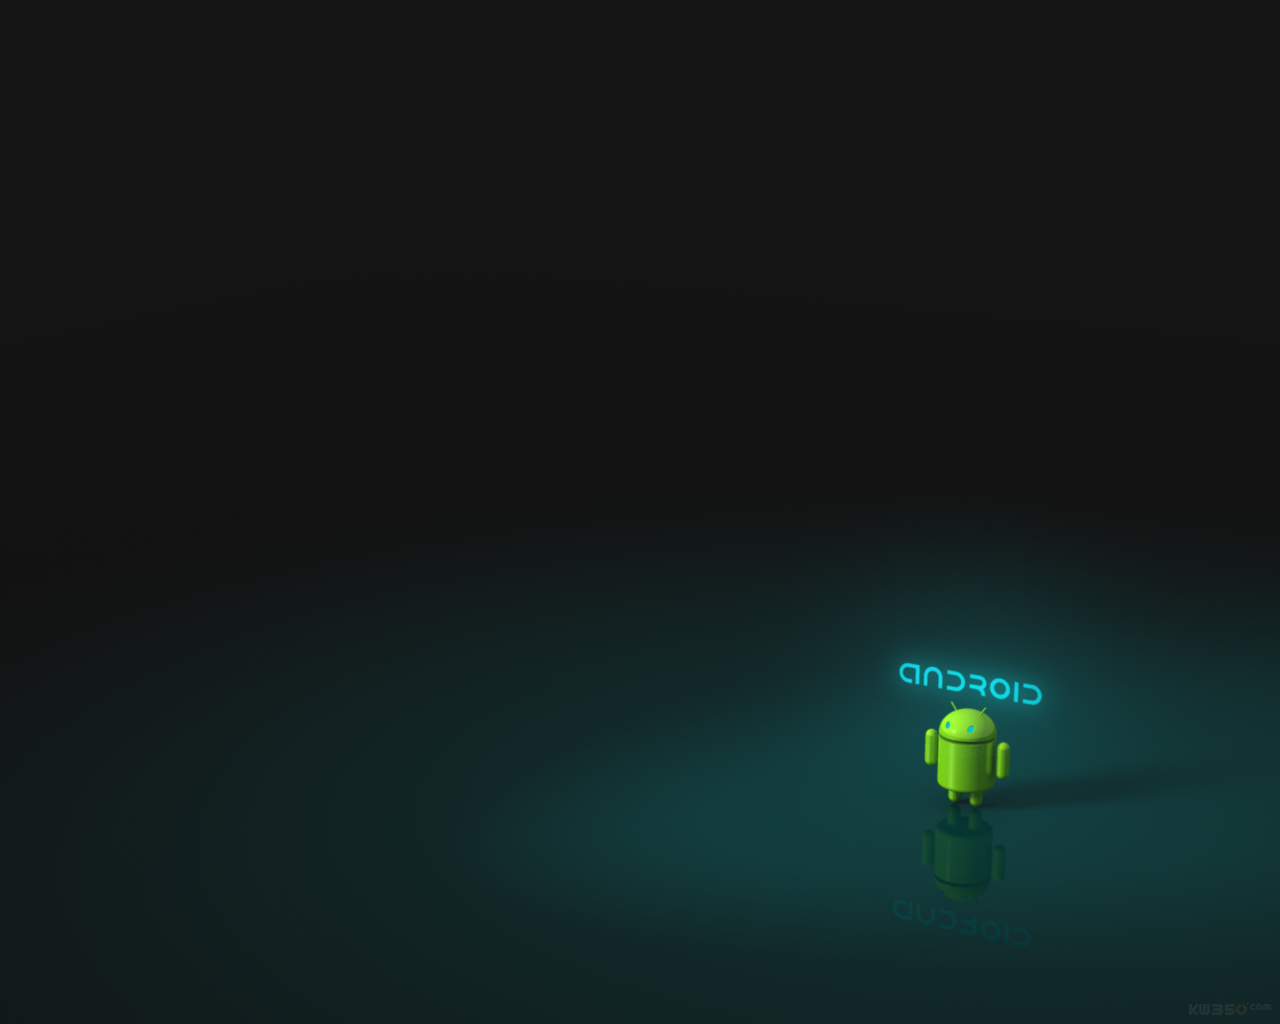 Android Logo And Font Black Background HD Wallpaper Image